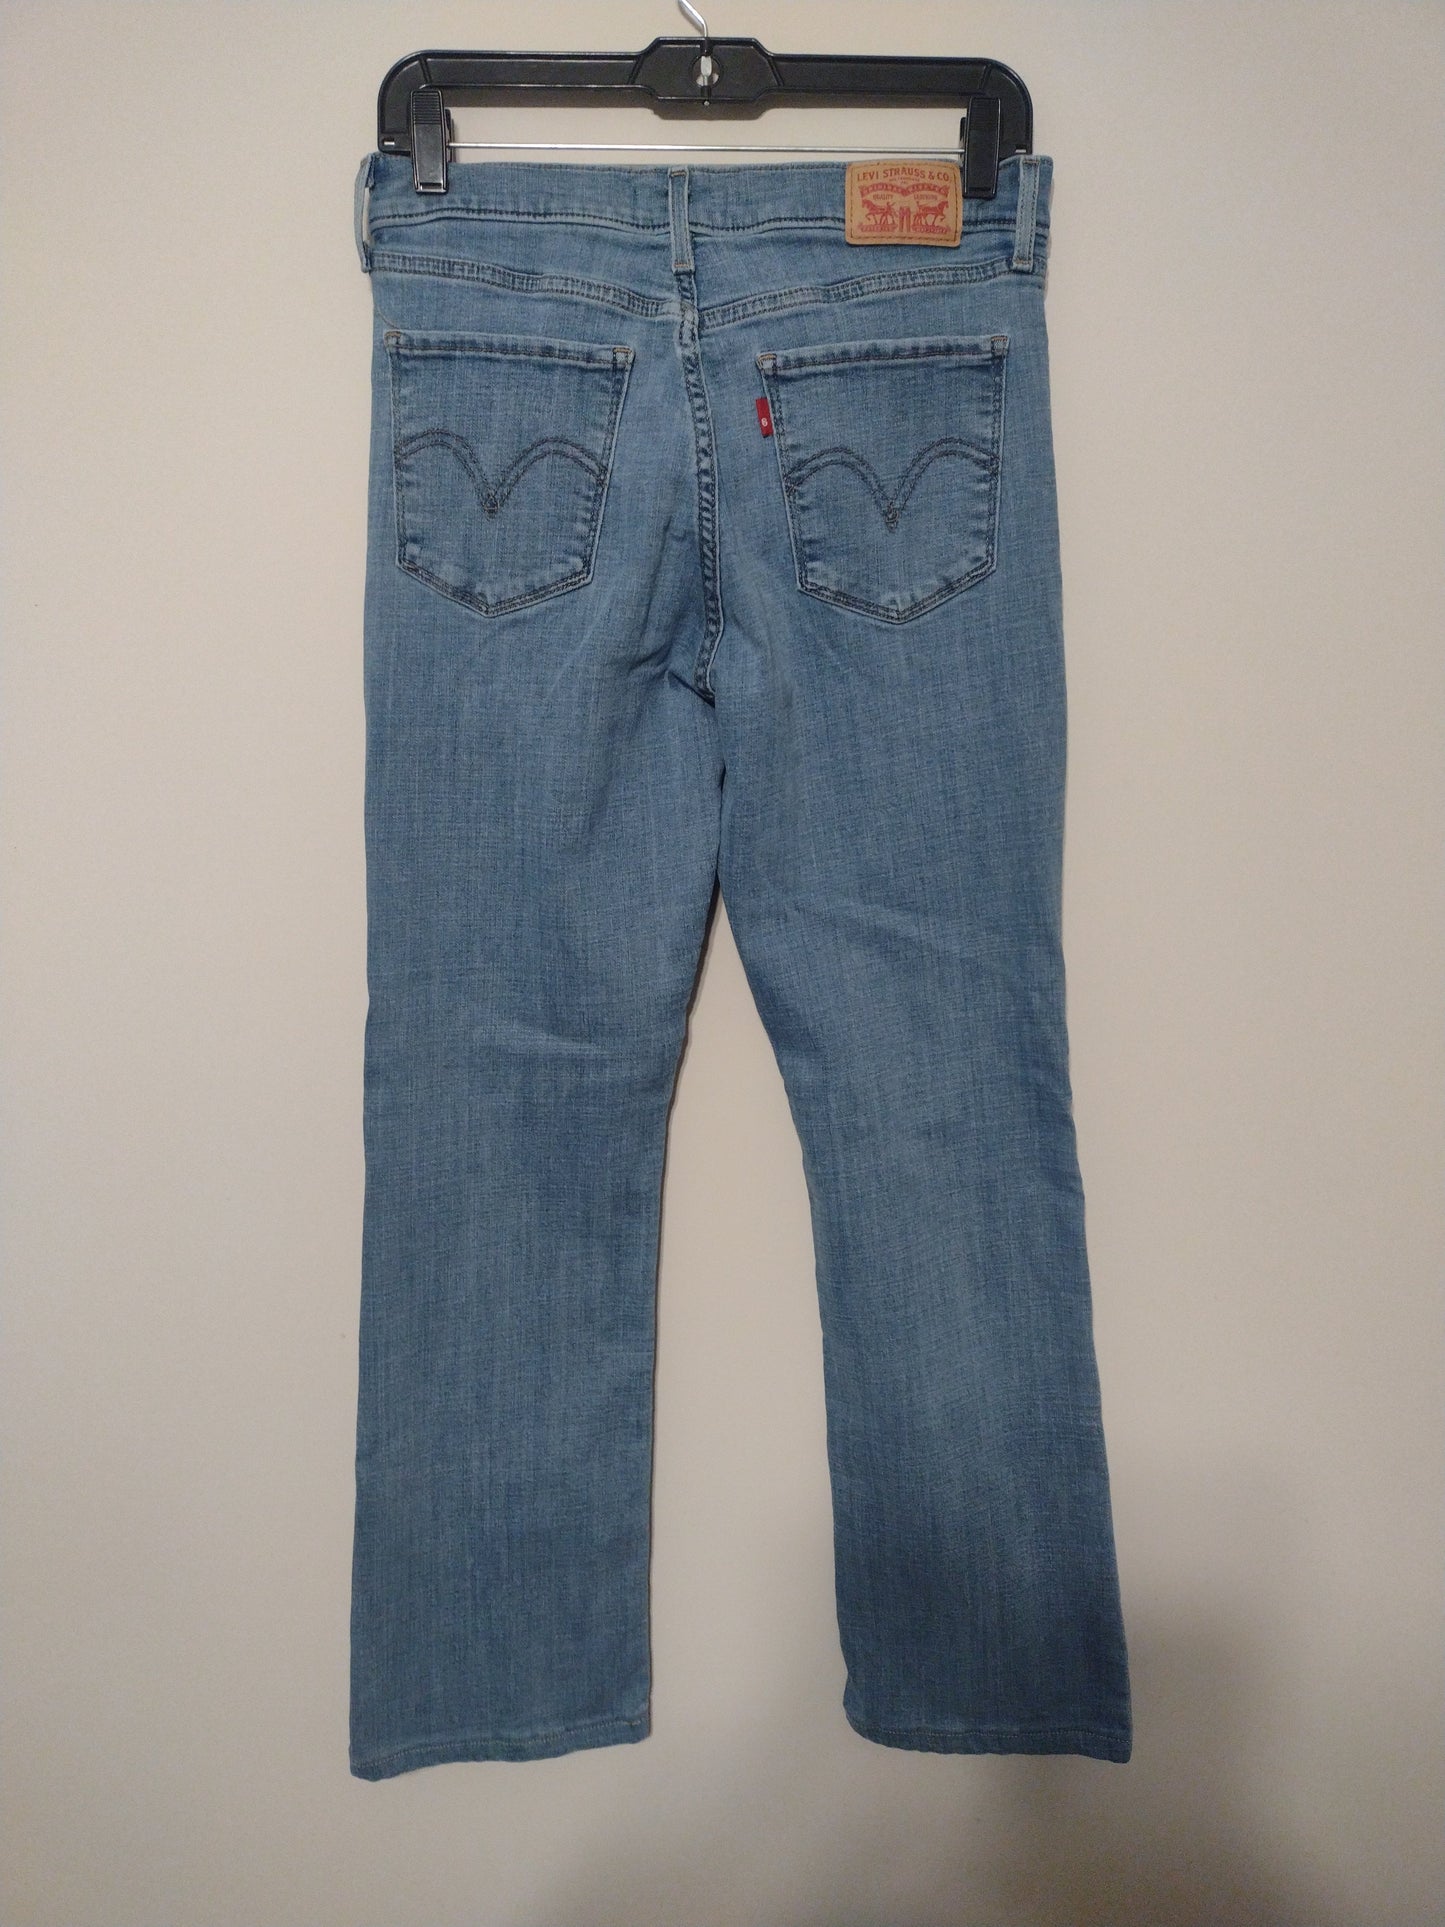 Jeans Boot Cut By Levis  Size: 6